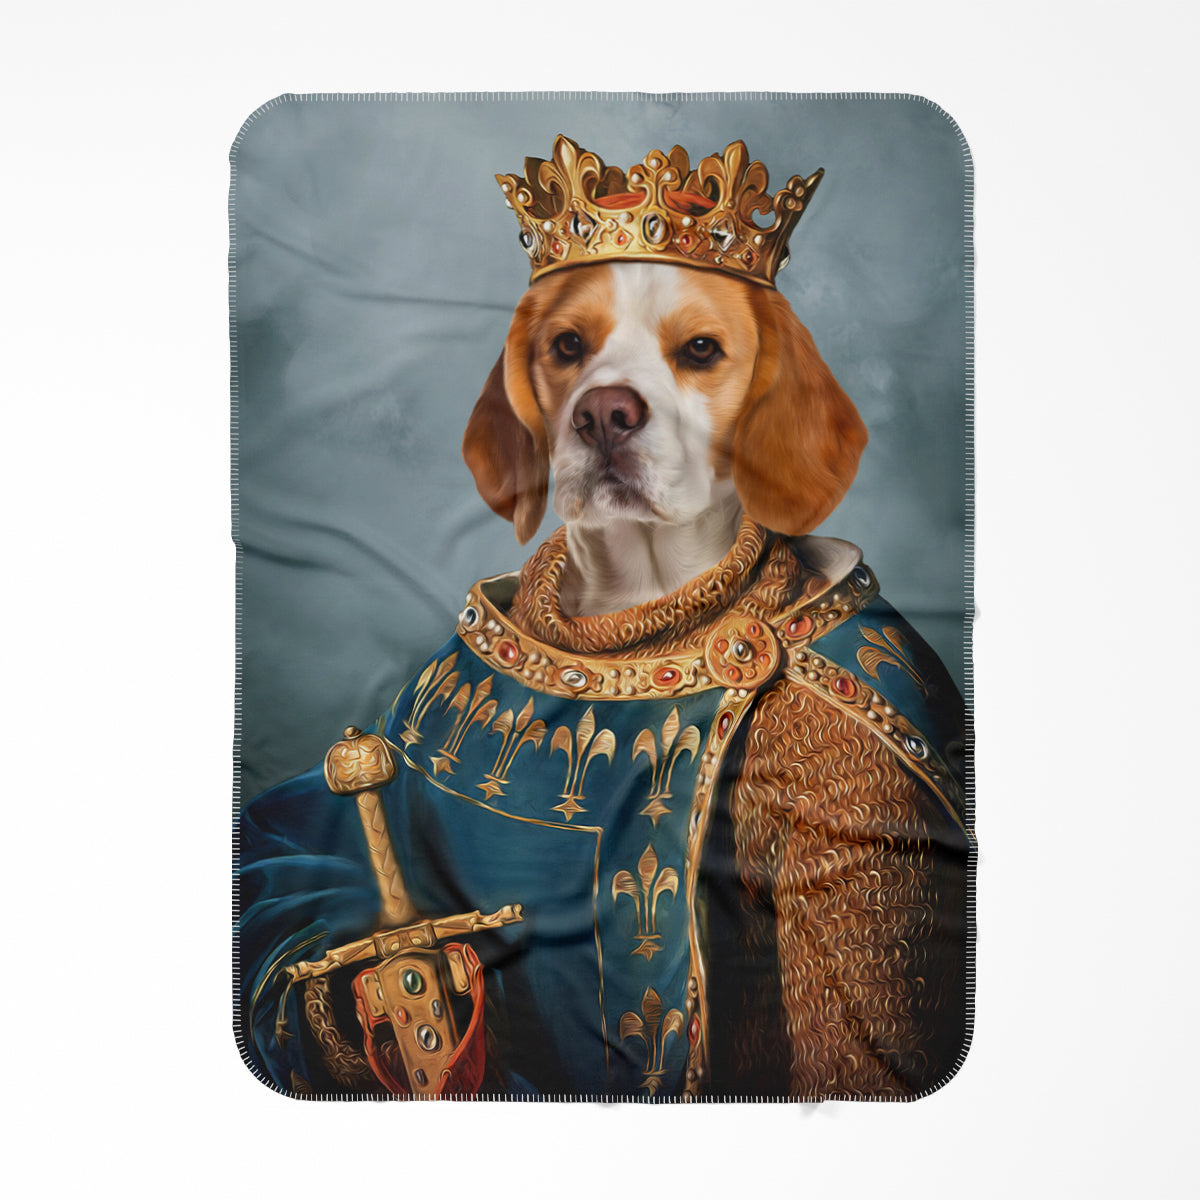 The Sovereign: Custom Pet Blanket - Paw & Glory - #pet portraits# - #dog portraits# - #pet portraits uk#Paw and glory, Pet portraits blanket,custom blanket for dog lovers, personalized puppy blankets, dog blankets india, print your pet on a blanket uk, cartoon dog blanket